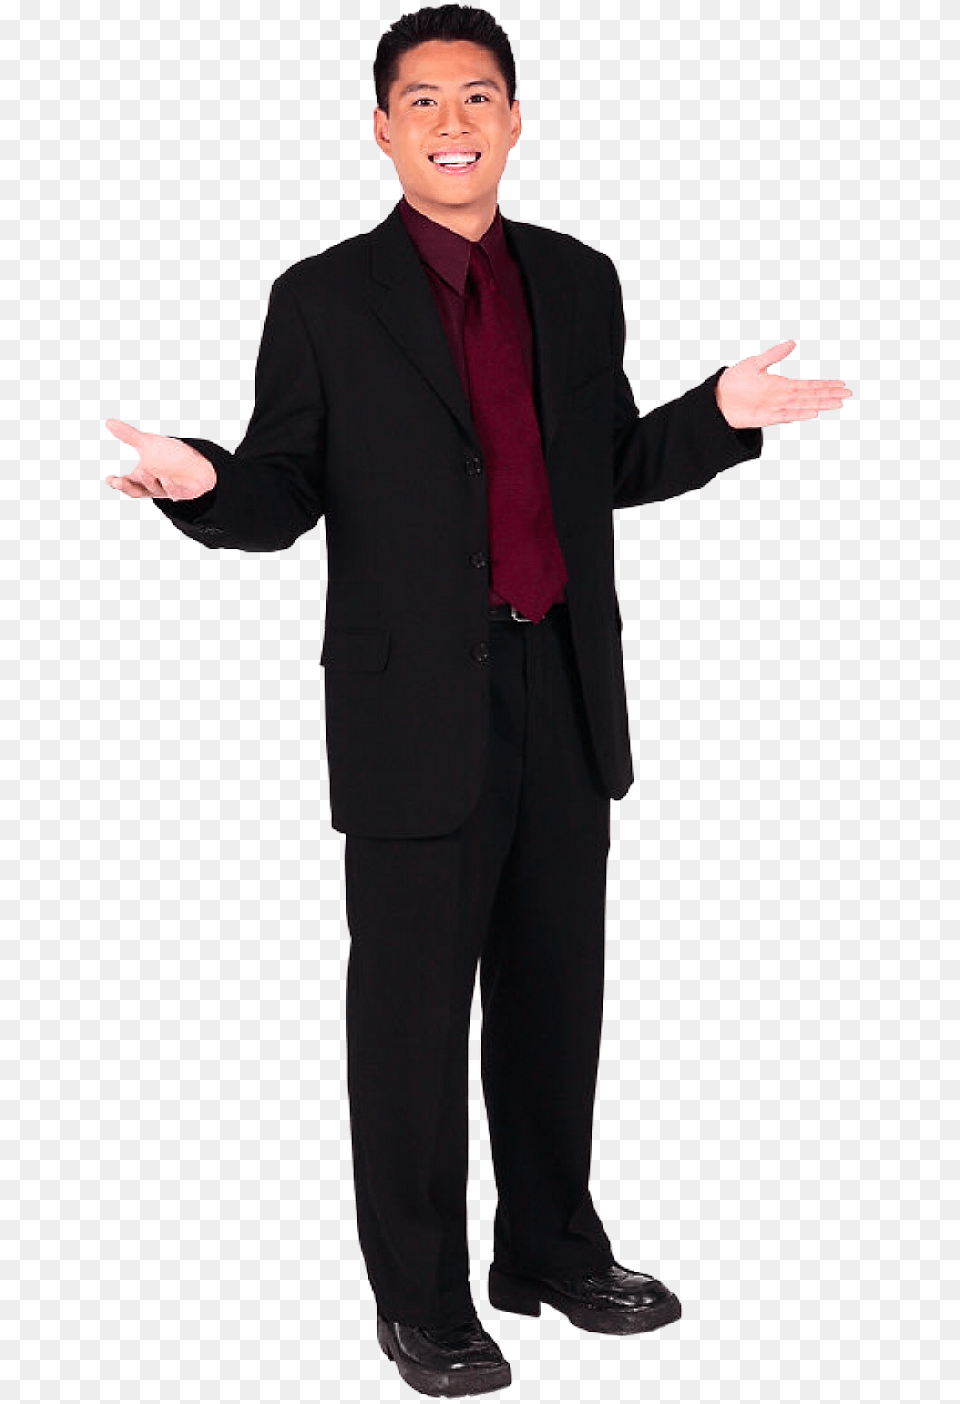 Standing Business Man, Tuxedo, Suit, Clothing, Formal Wear Png